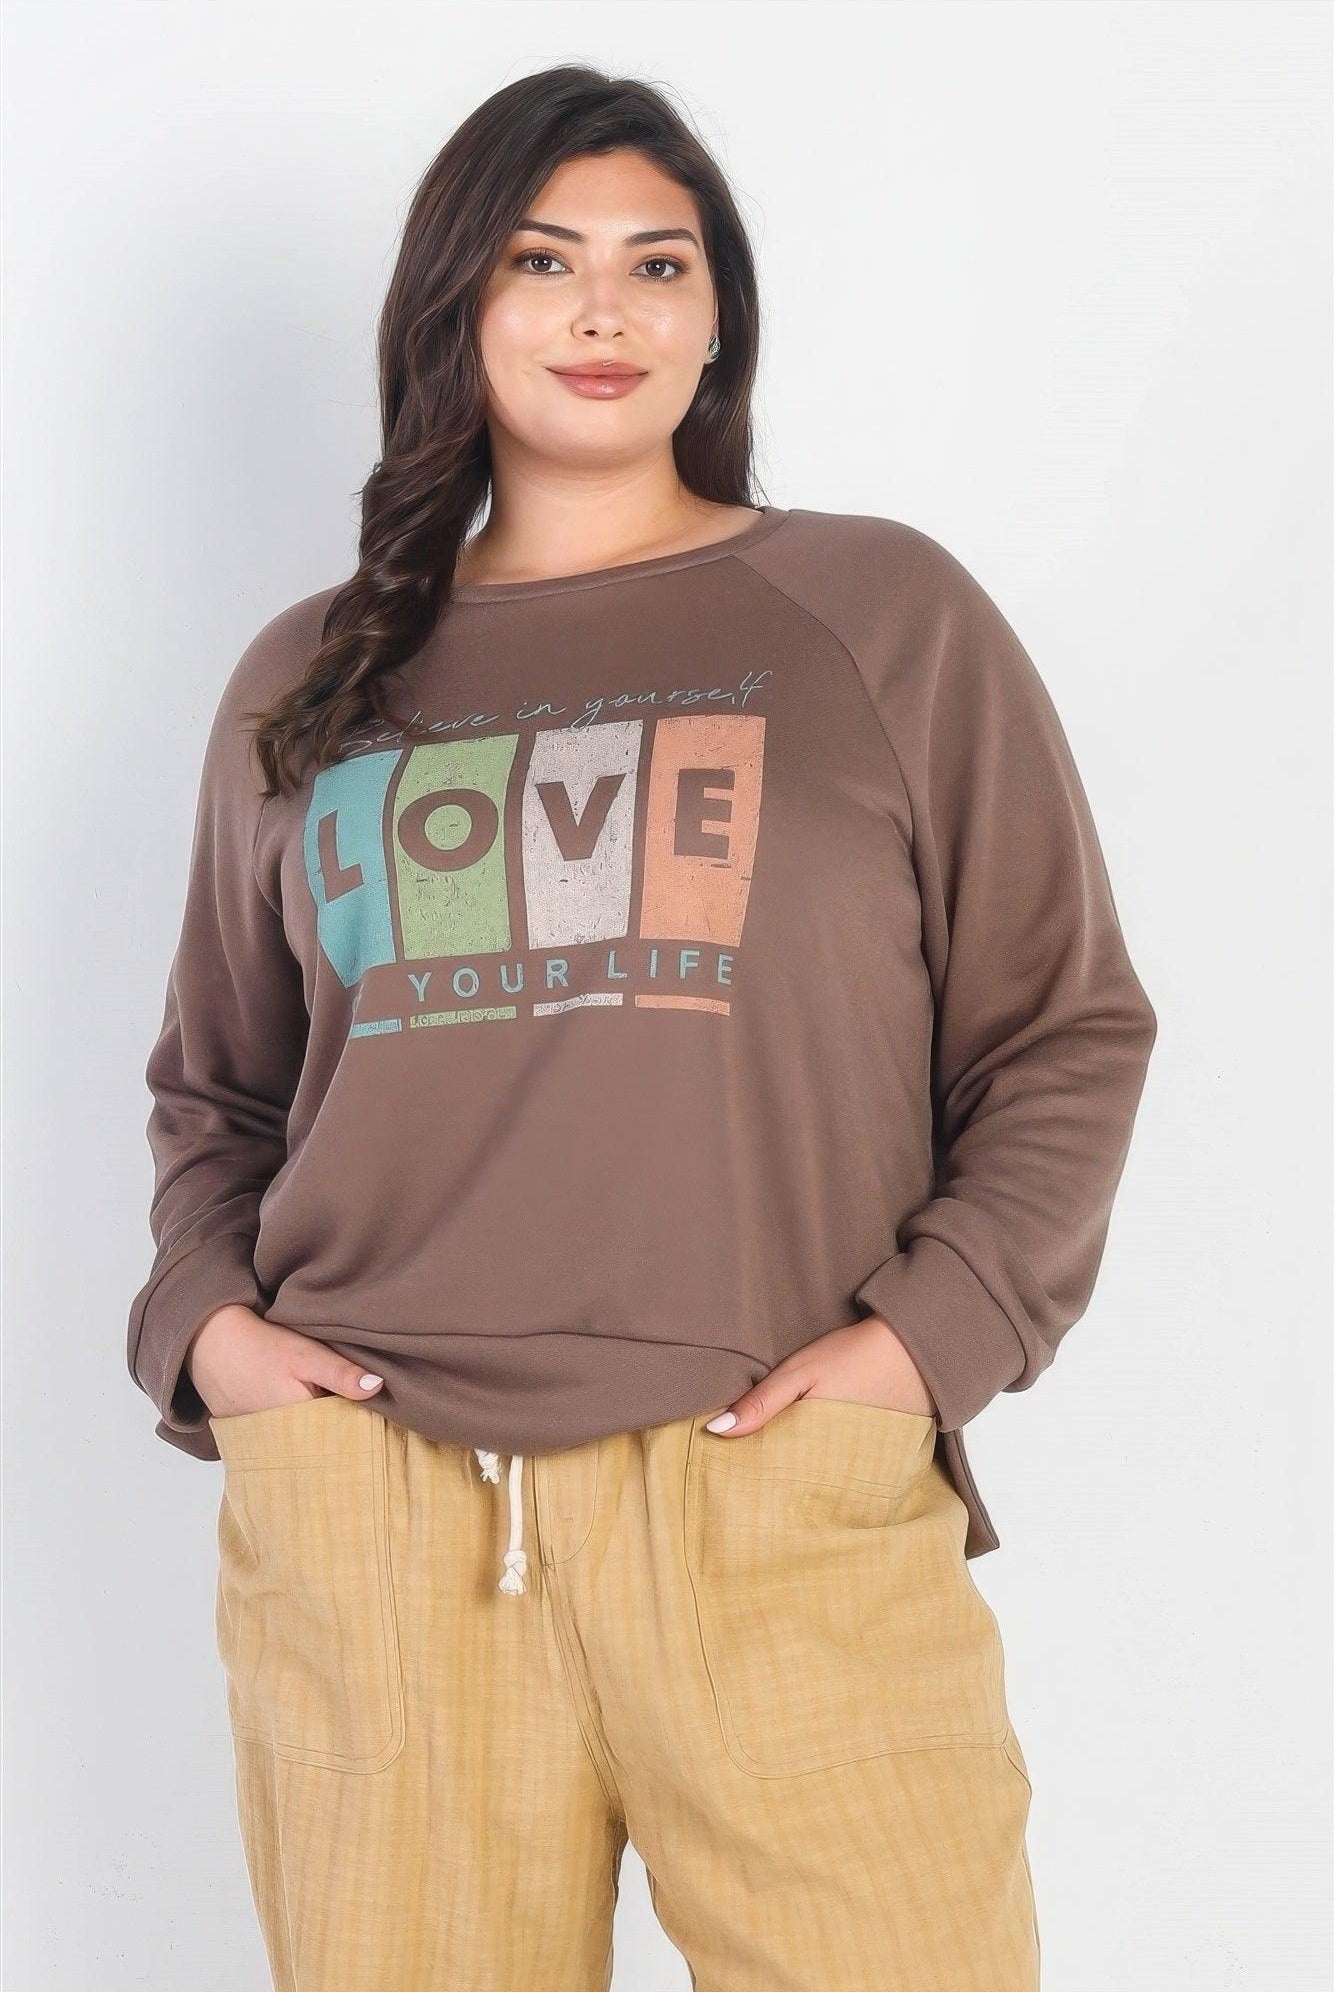 Women's Shirts Plus Cocoa "Believe In Yourself, 4 Love Of Your Life" Long Sleeve Top